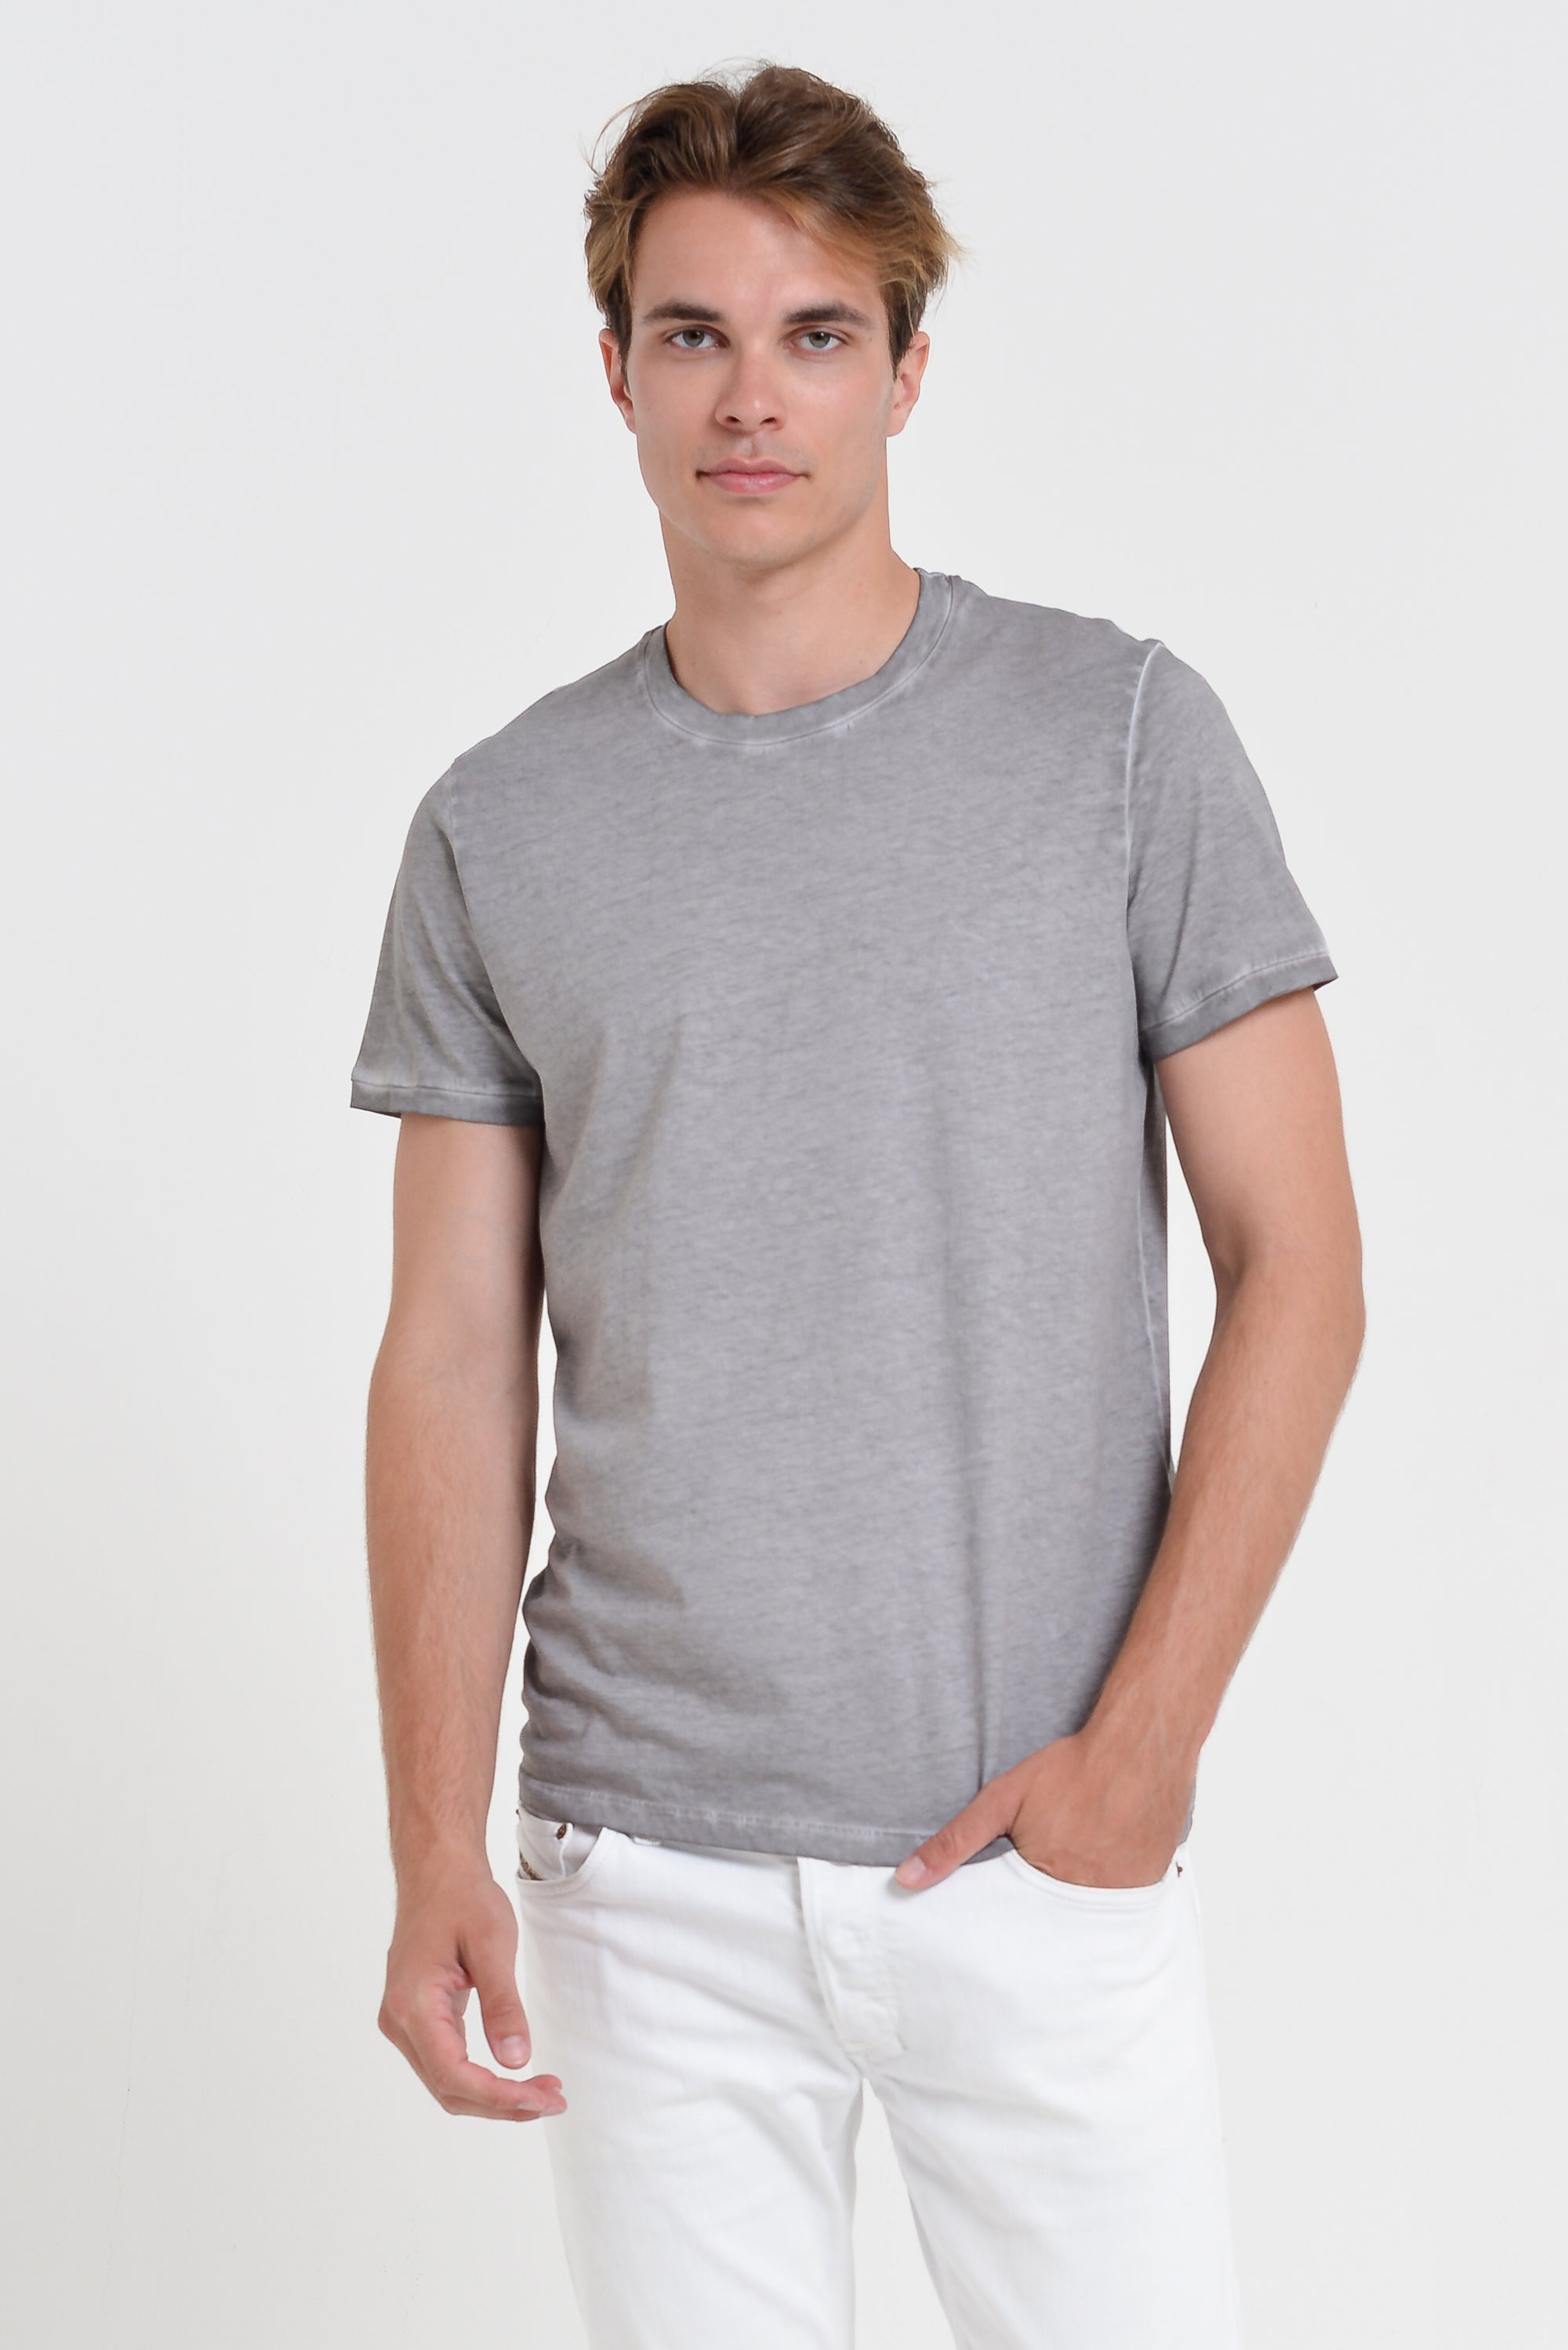 Smart Casual Cotton T-Shirt - Dolphin